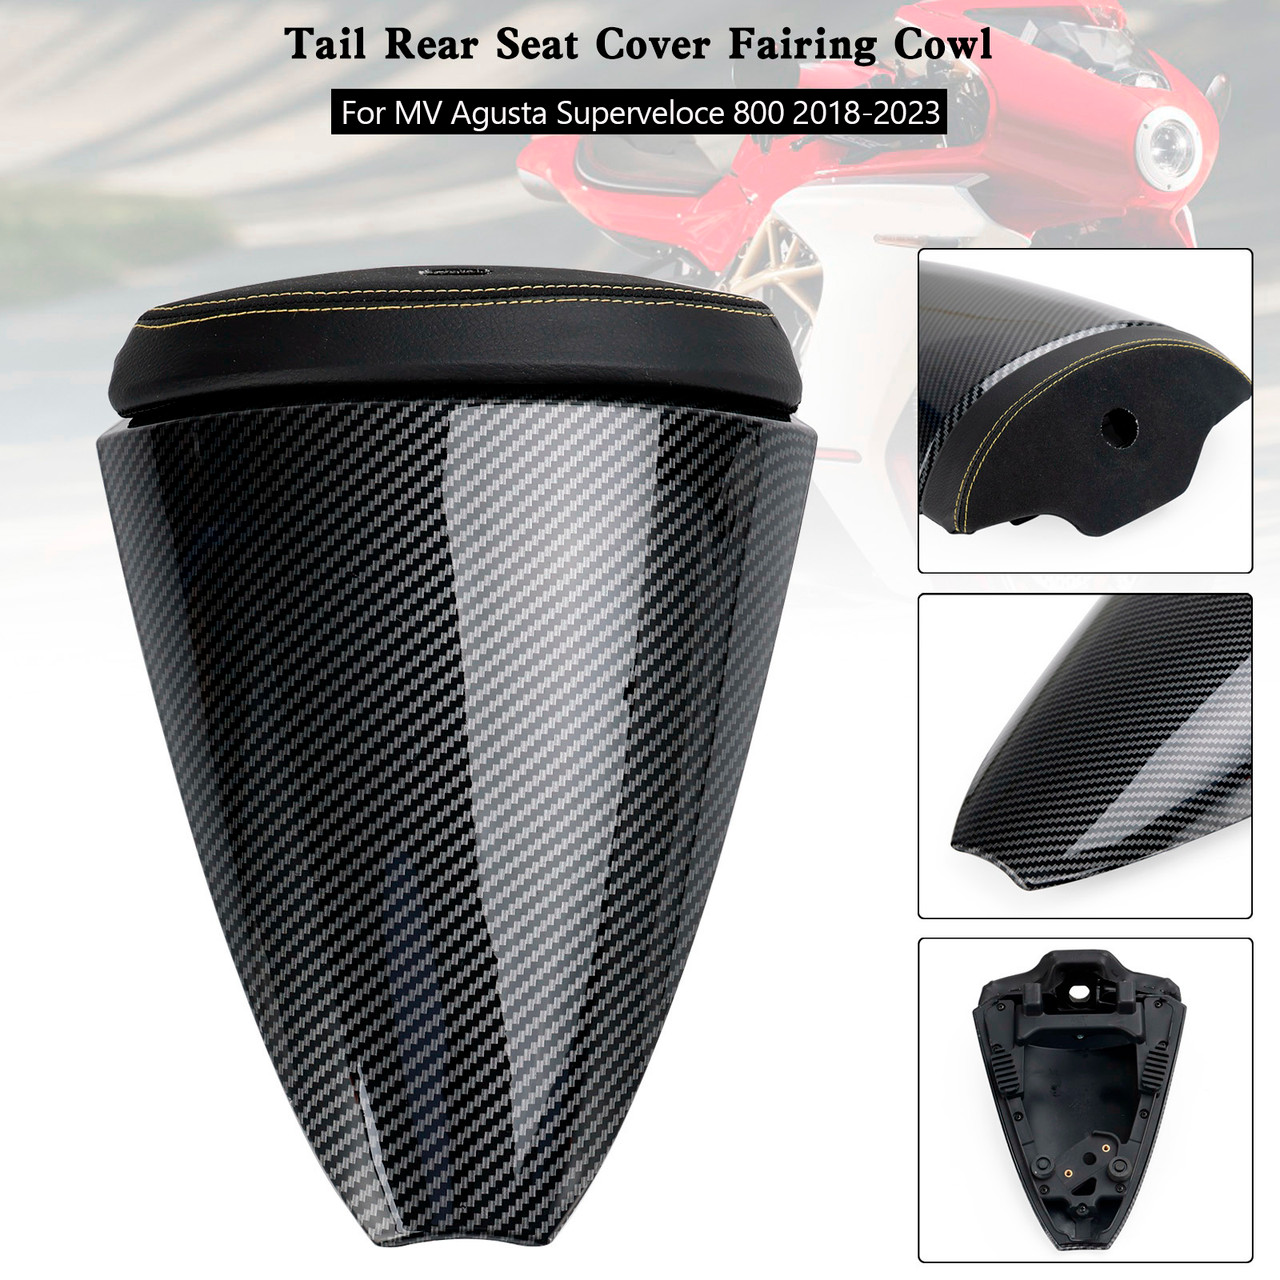 Tail Rear Seat Cover Fairing Cowl For MV Agusta Superveloce 800 2018-2023 CBN